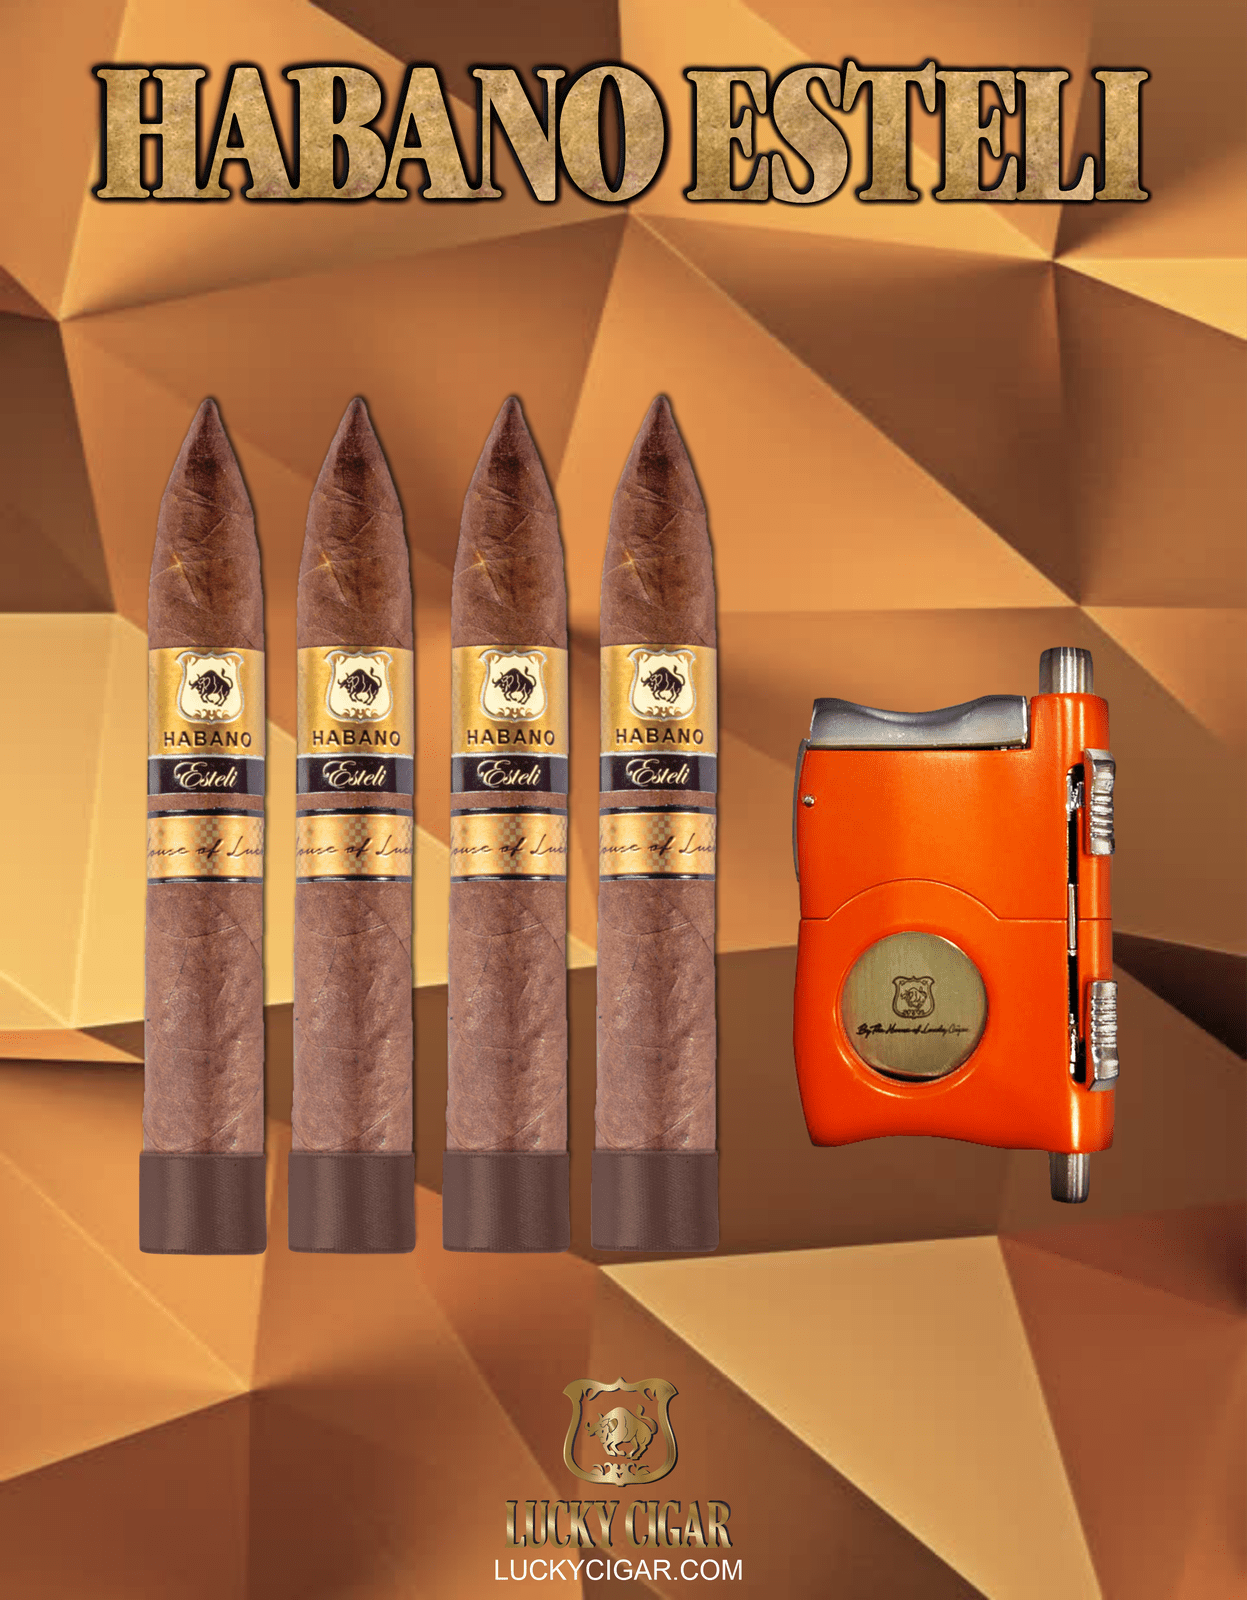 Habano Cigars: Habano Esteli by Lucky Cigar: Set of 4 Cigars, 4 Torpedo with Cutter, Puncher